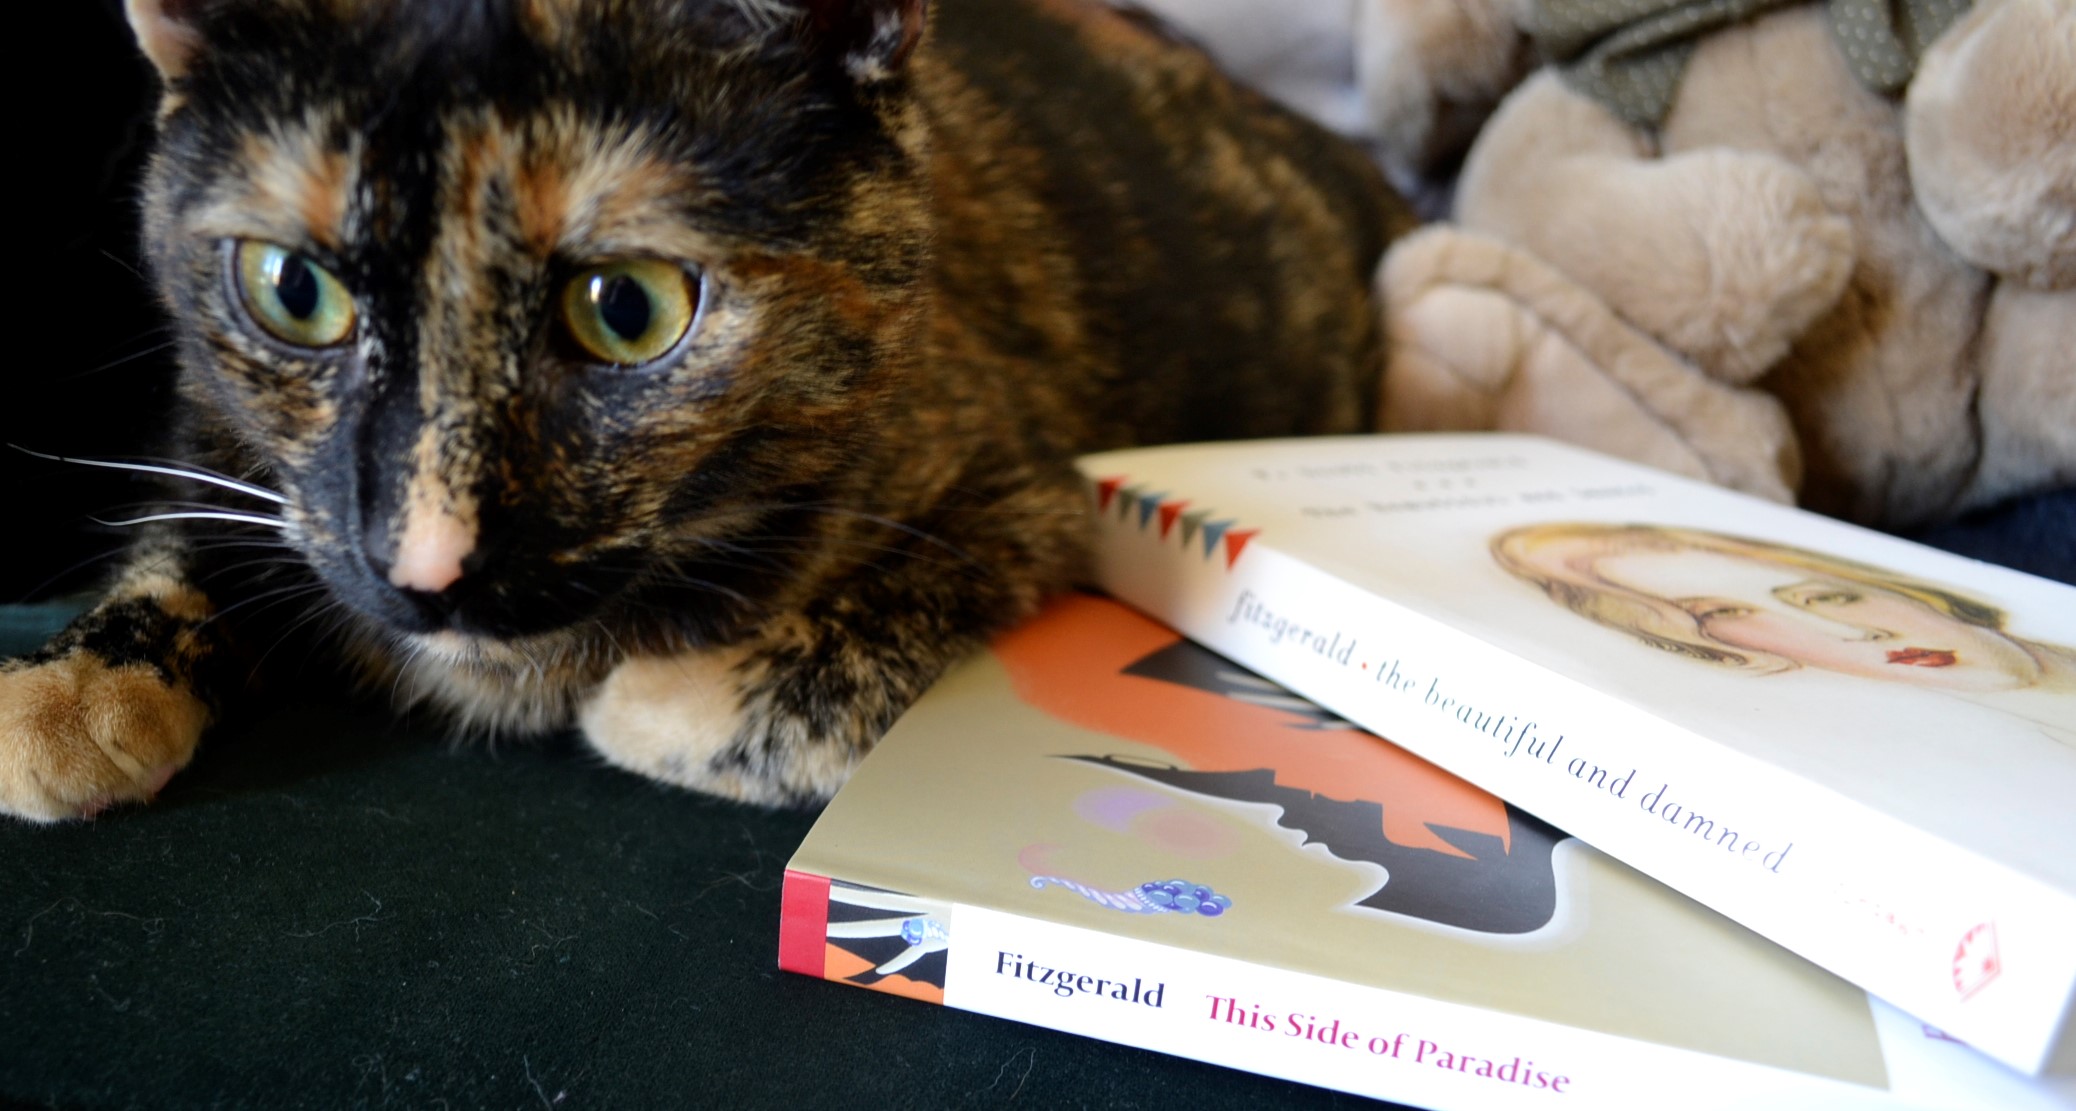 A tortoiseshell kitten sits beside two books by the Fitzgeralds.